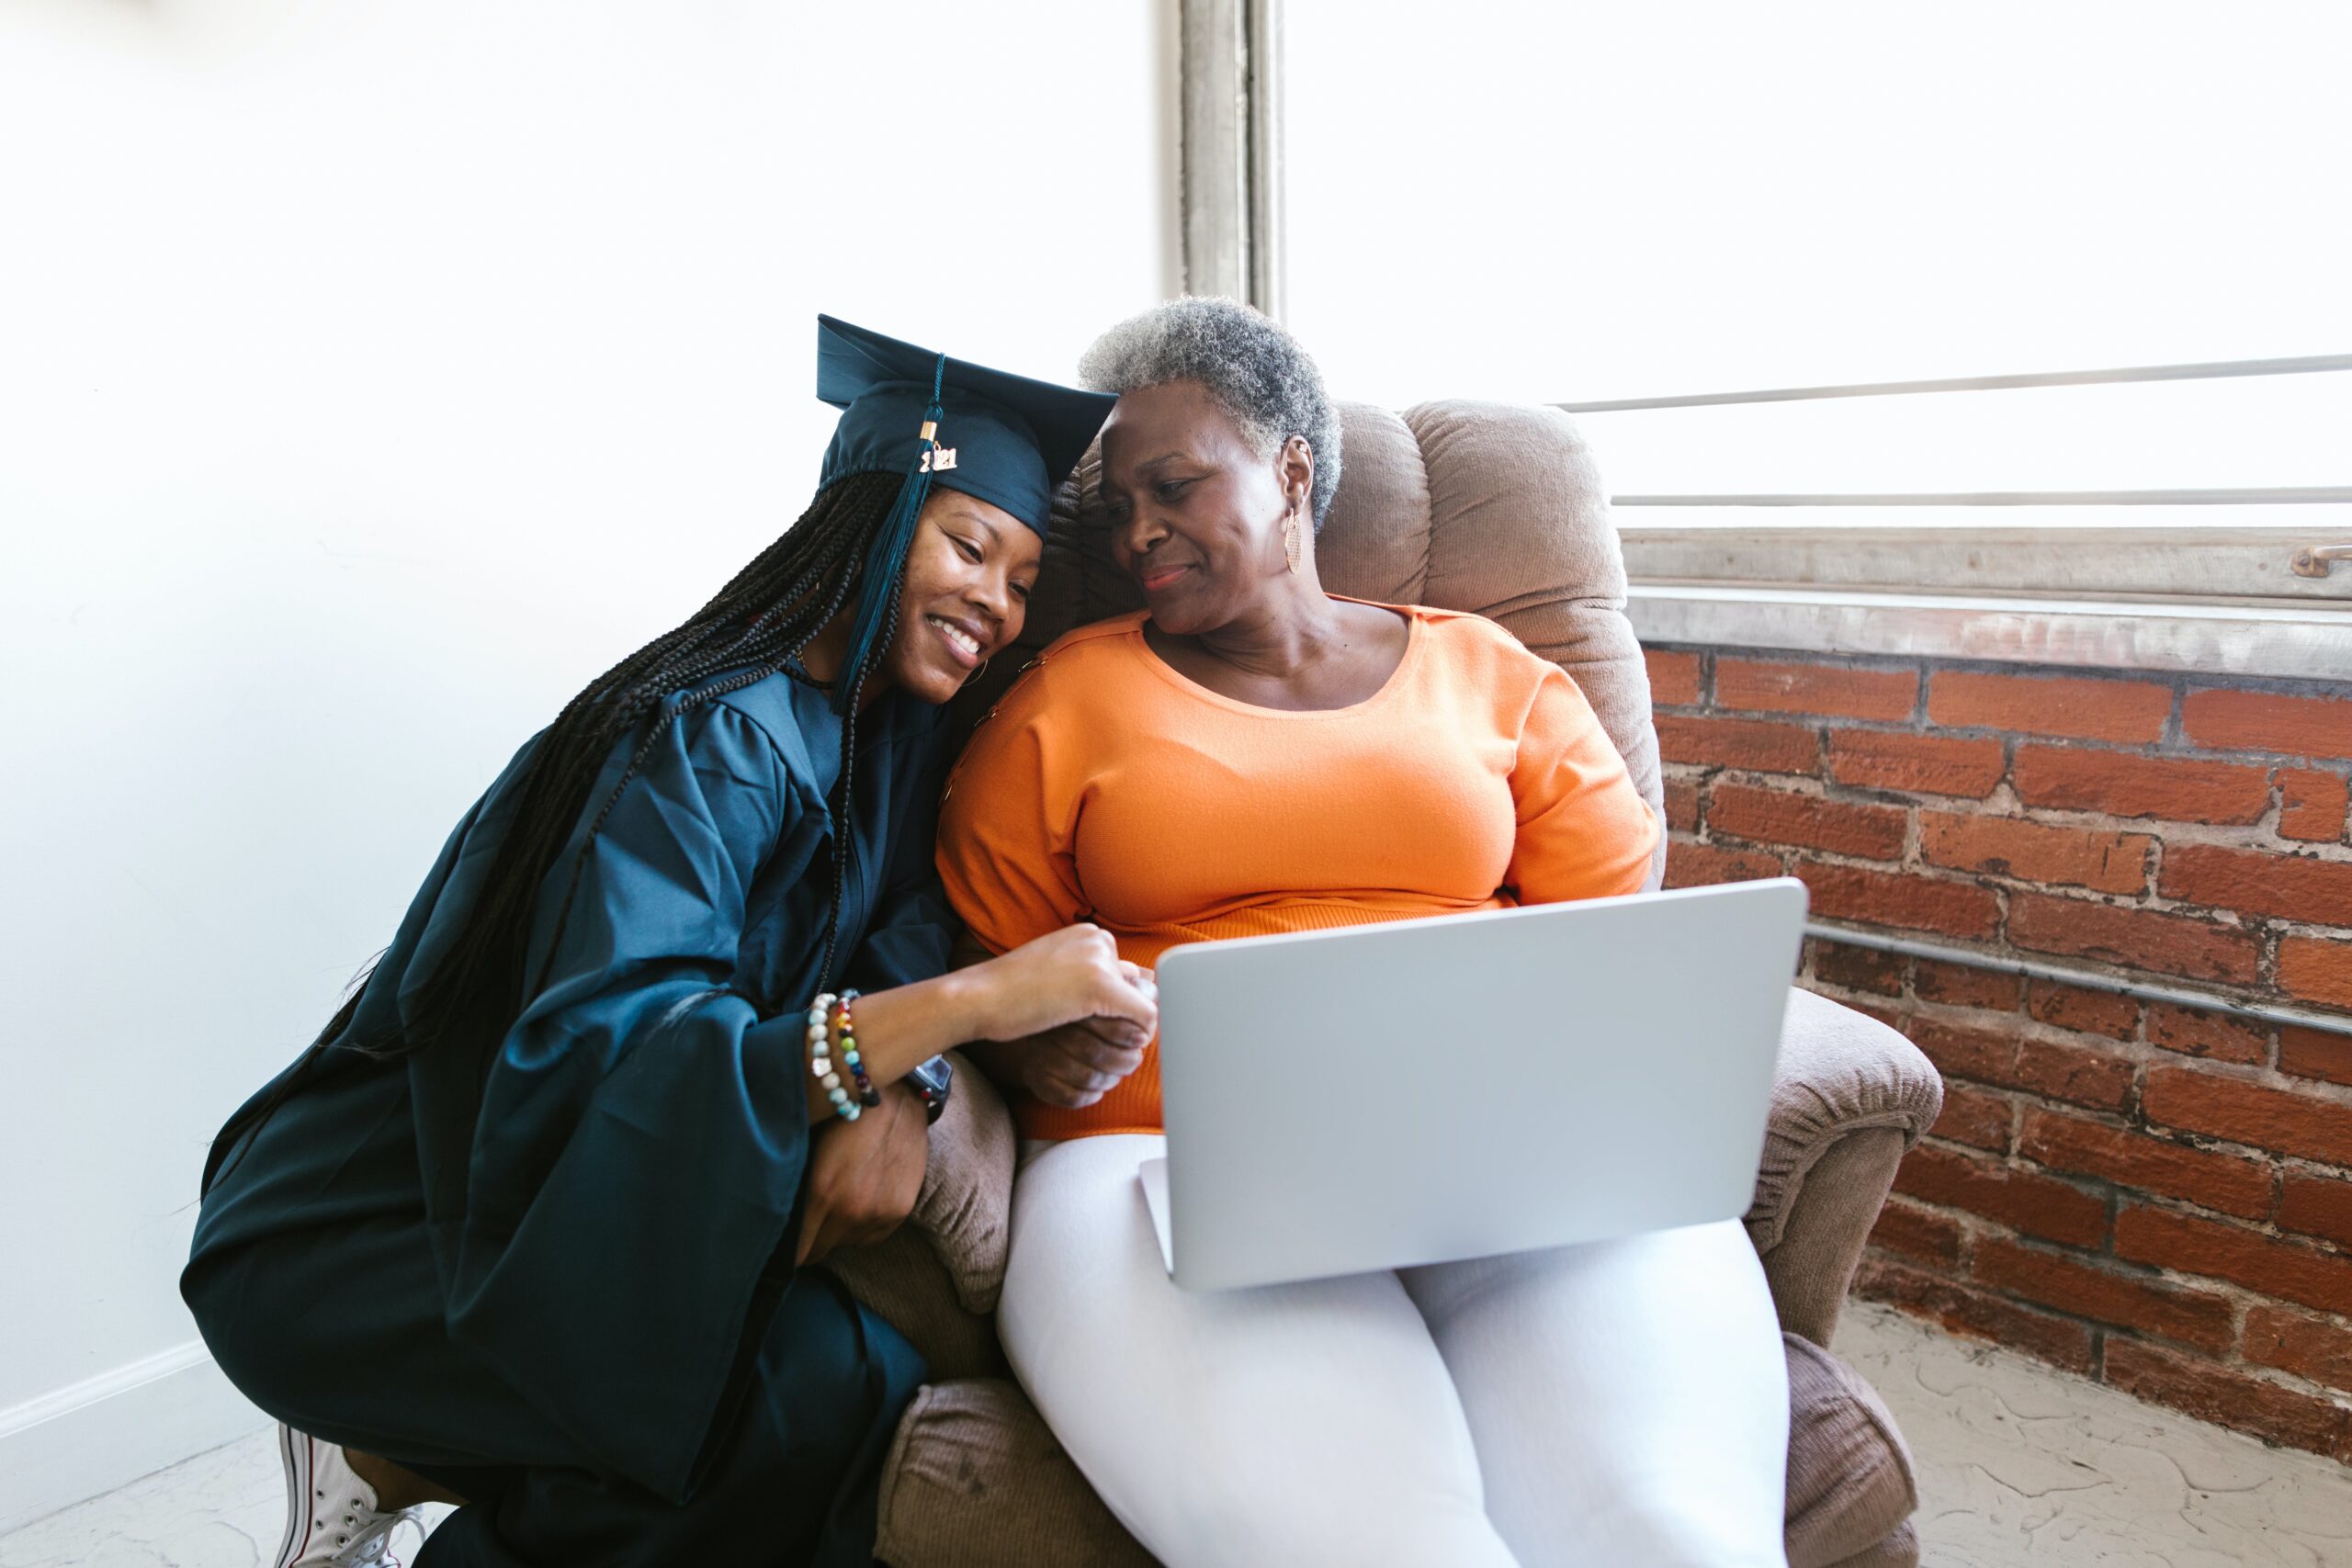 What do you do when you’re child comes home after graduating college? 